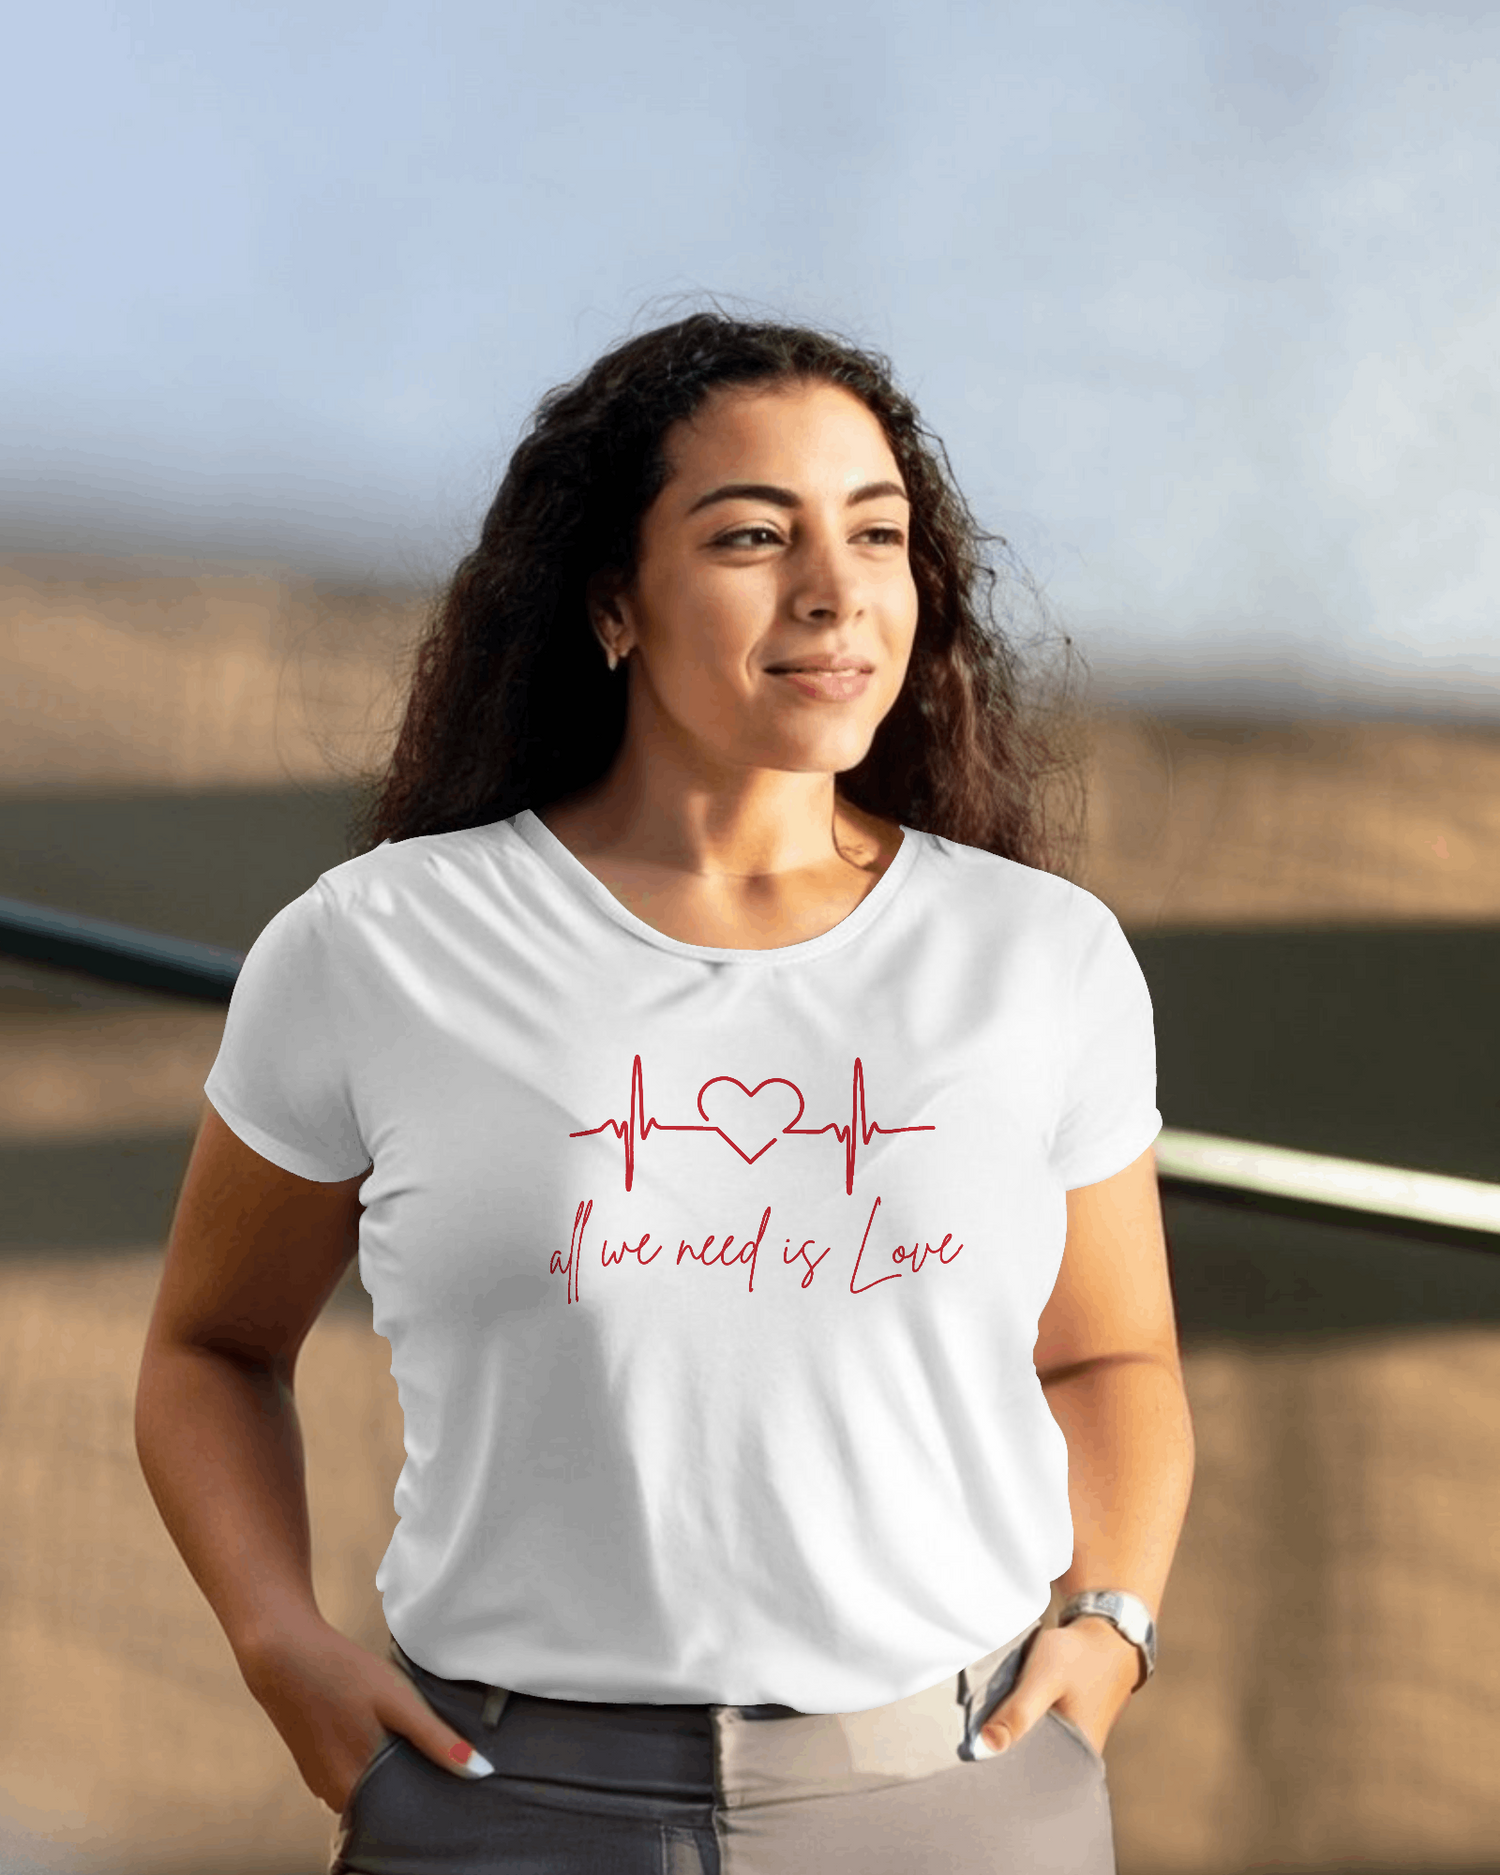 Expanse 100% Premium Combed Cotton Women love Tee/T-shirts for Girls - All We Need Is Love